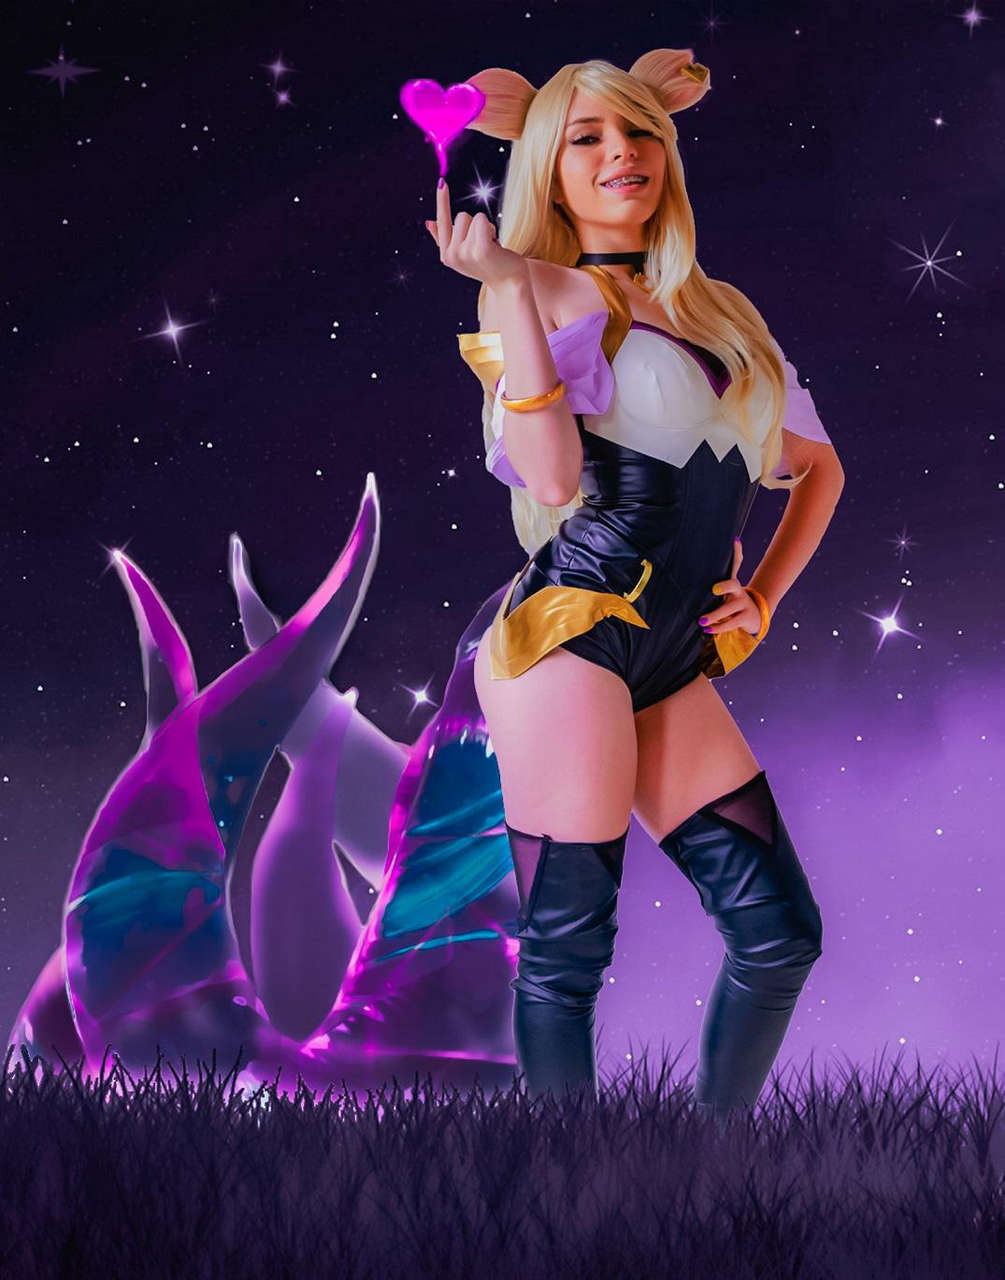 Kda Ahri From League Of Legends By Ale Garce